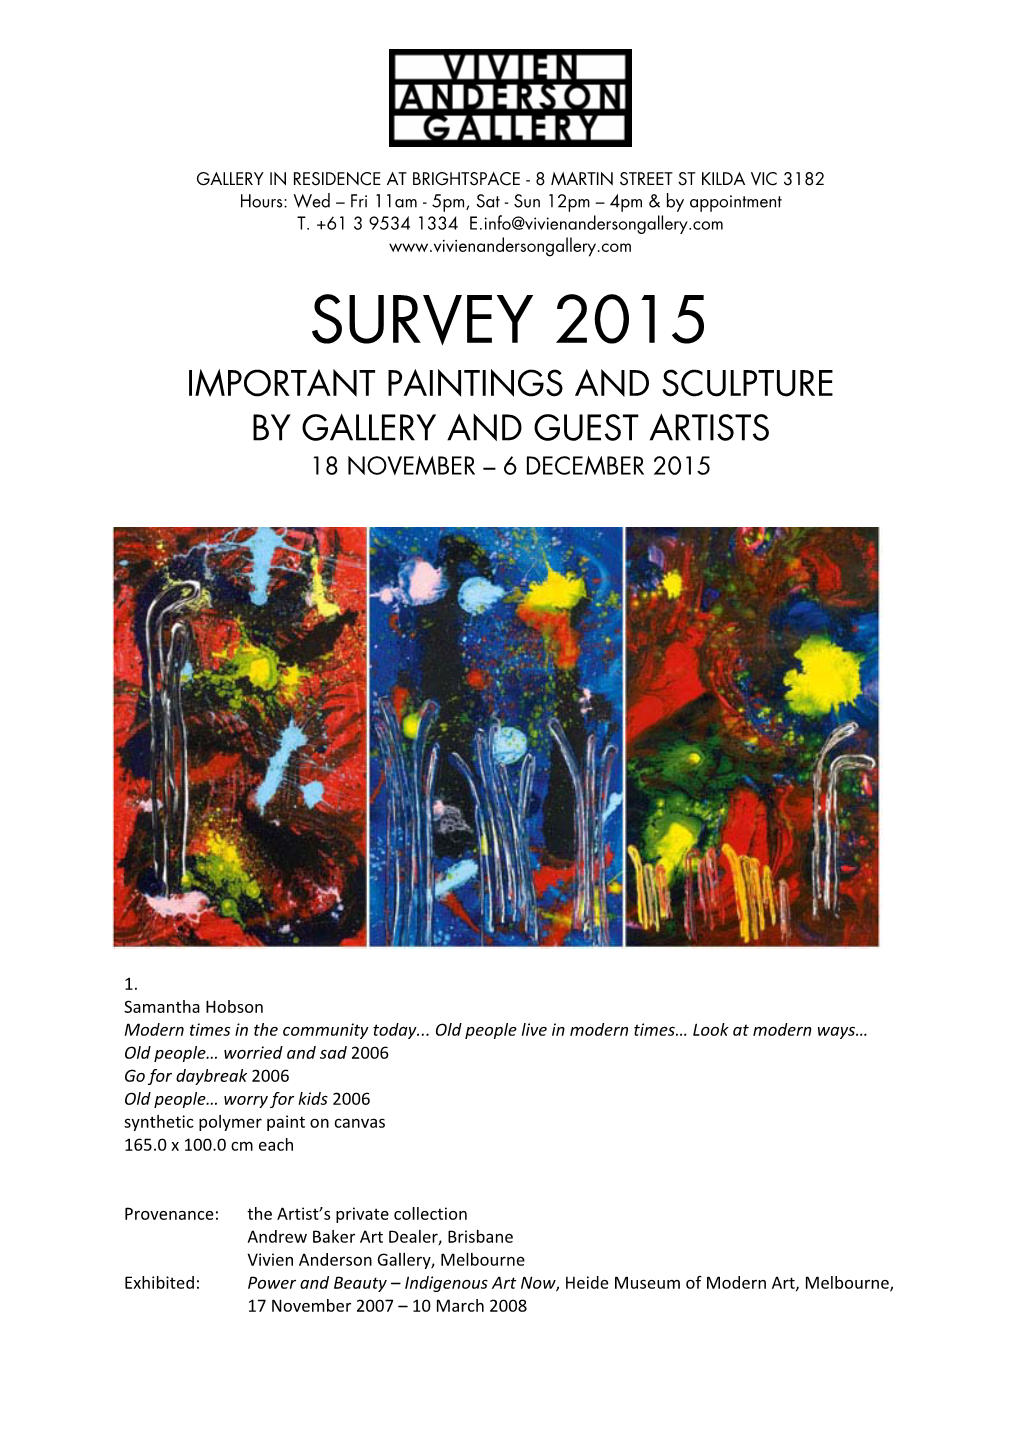 Survey 2015 Important Paintings and Sculpture by Gallery and Guest Artists